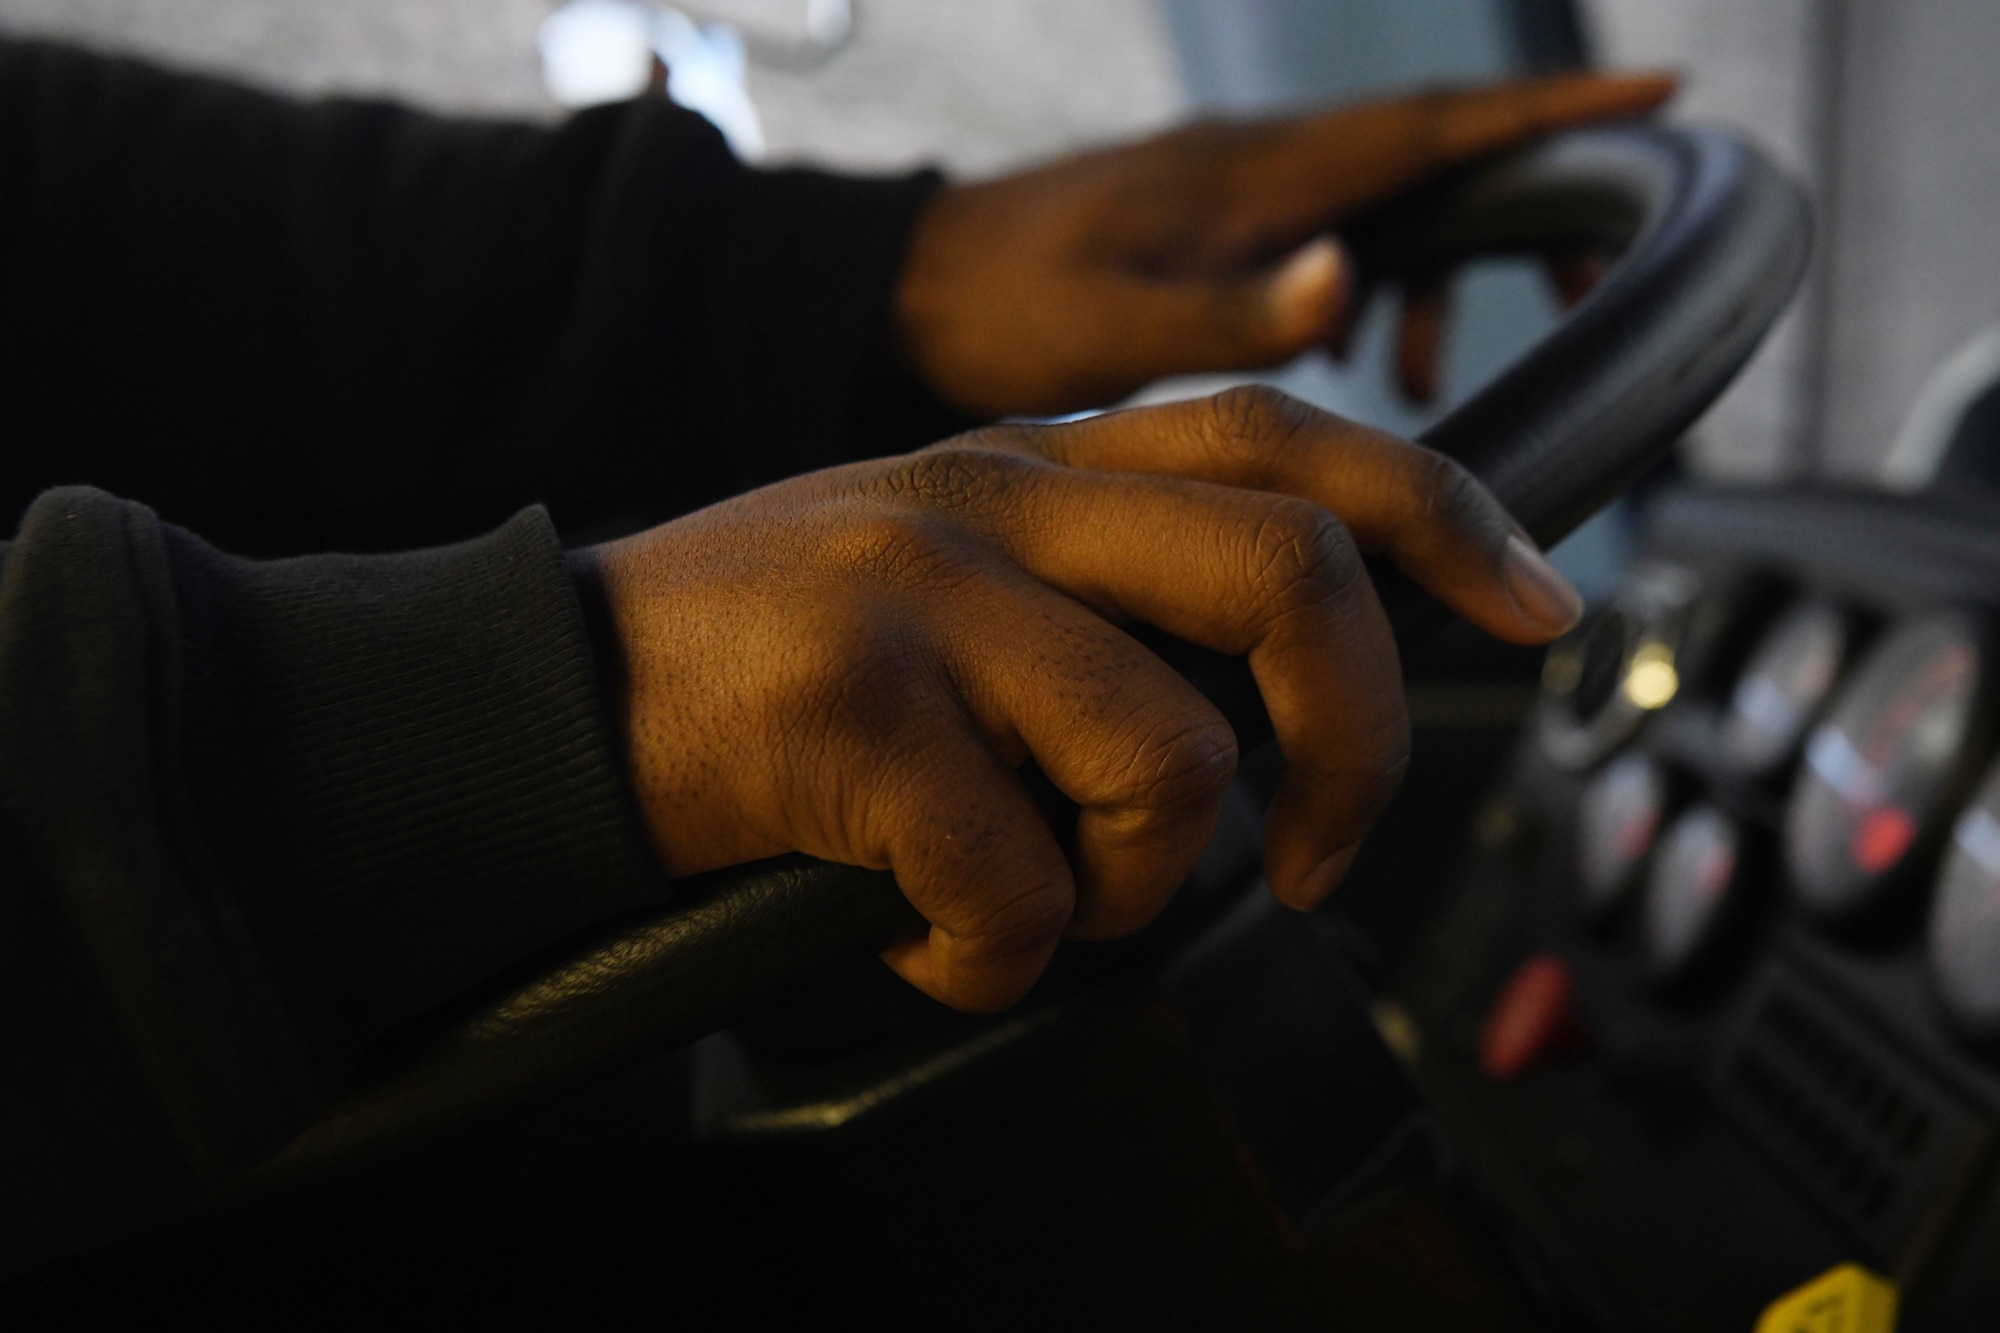 Jonathan Matthews, a firefighter assigned to the 97th AMW Fire Department, grips the steering wheel on a driving simulator Jan 15., 2019, at Altus Air Force Base, Okla. The simulator is used to help train vehicle operations while outdoor conditions are not ideal. (U.S. Air Force photo by Airman 1st Class Jeremy Wentworth)